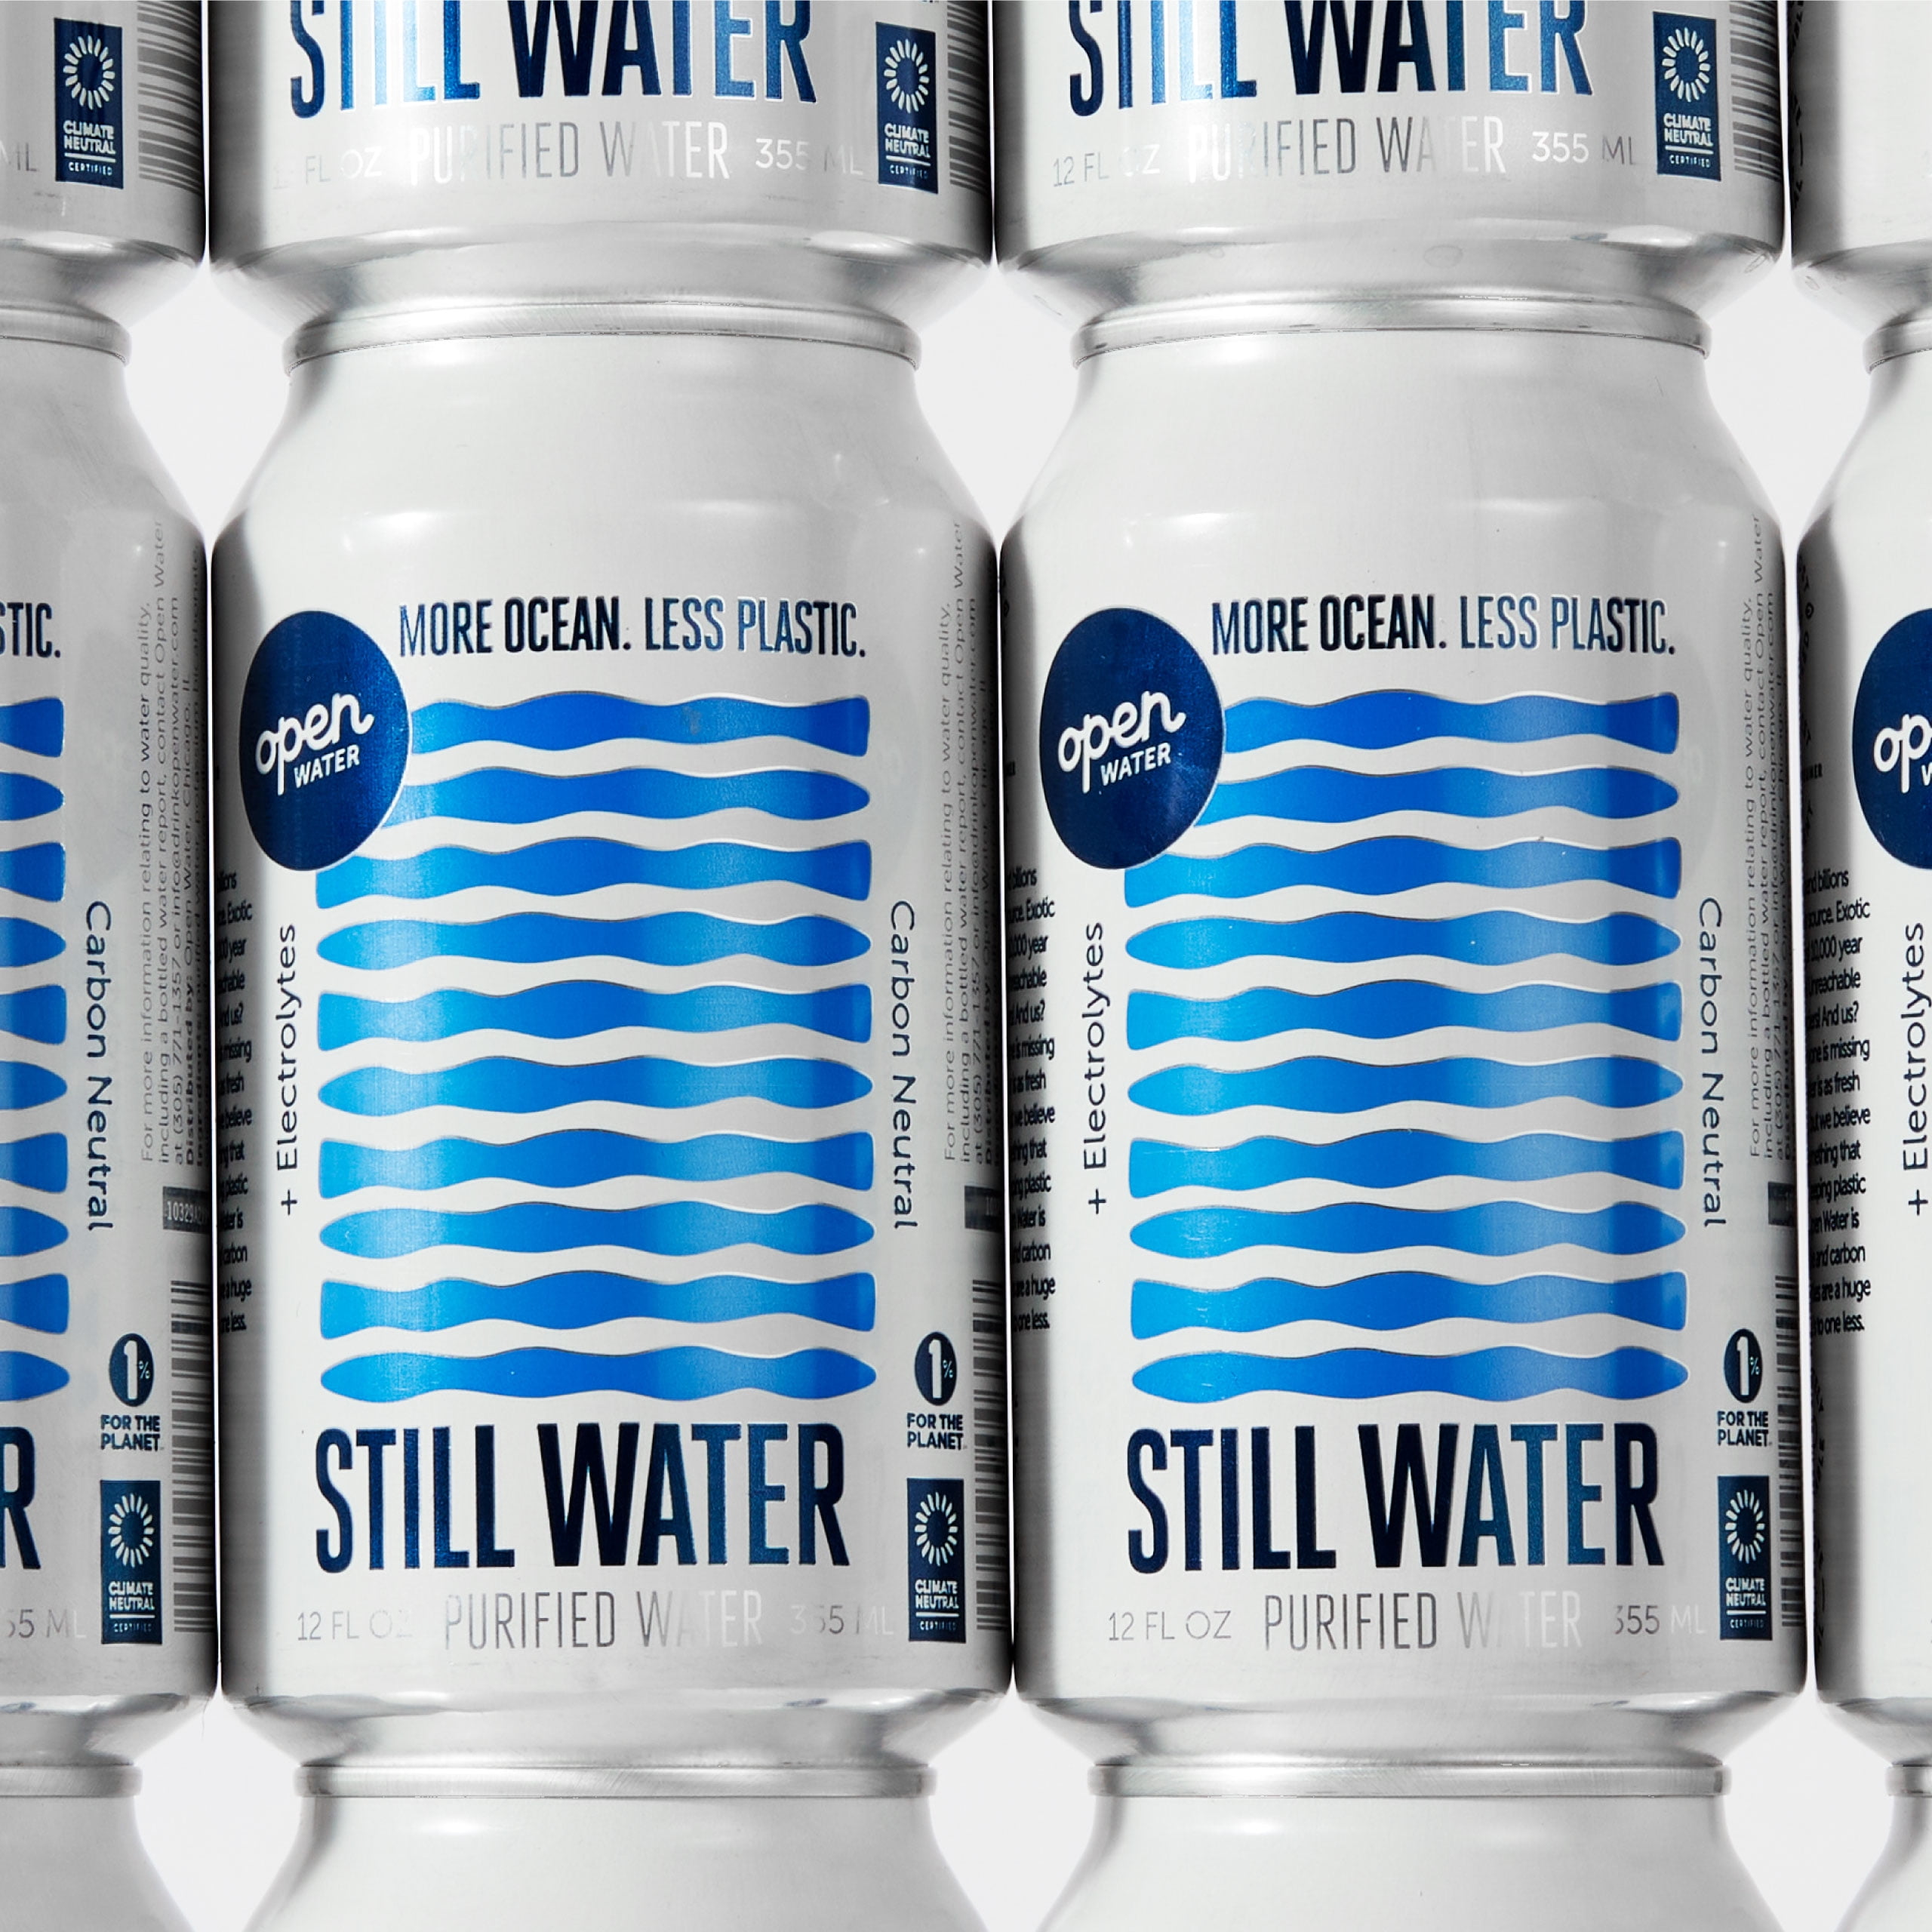 Open Water  Canned water for clean oceans